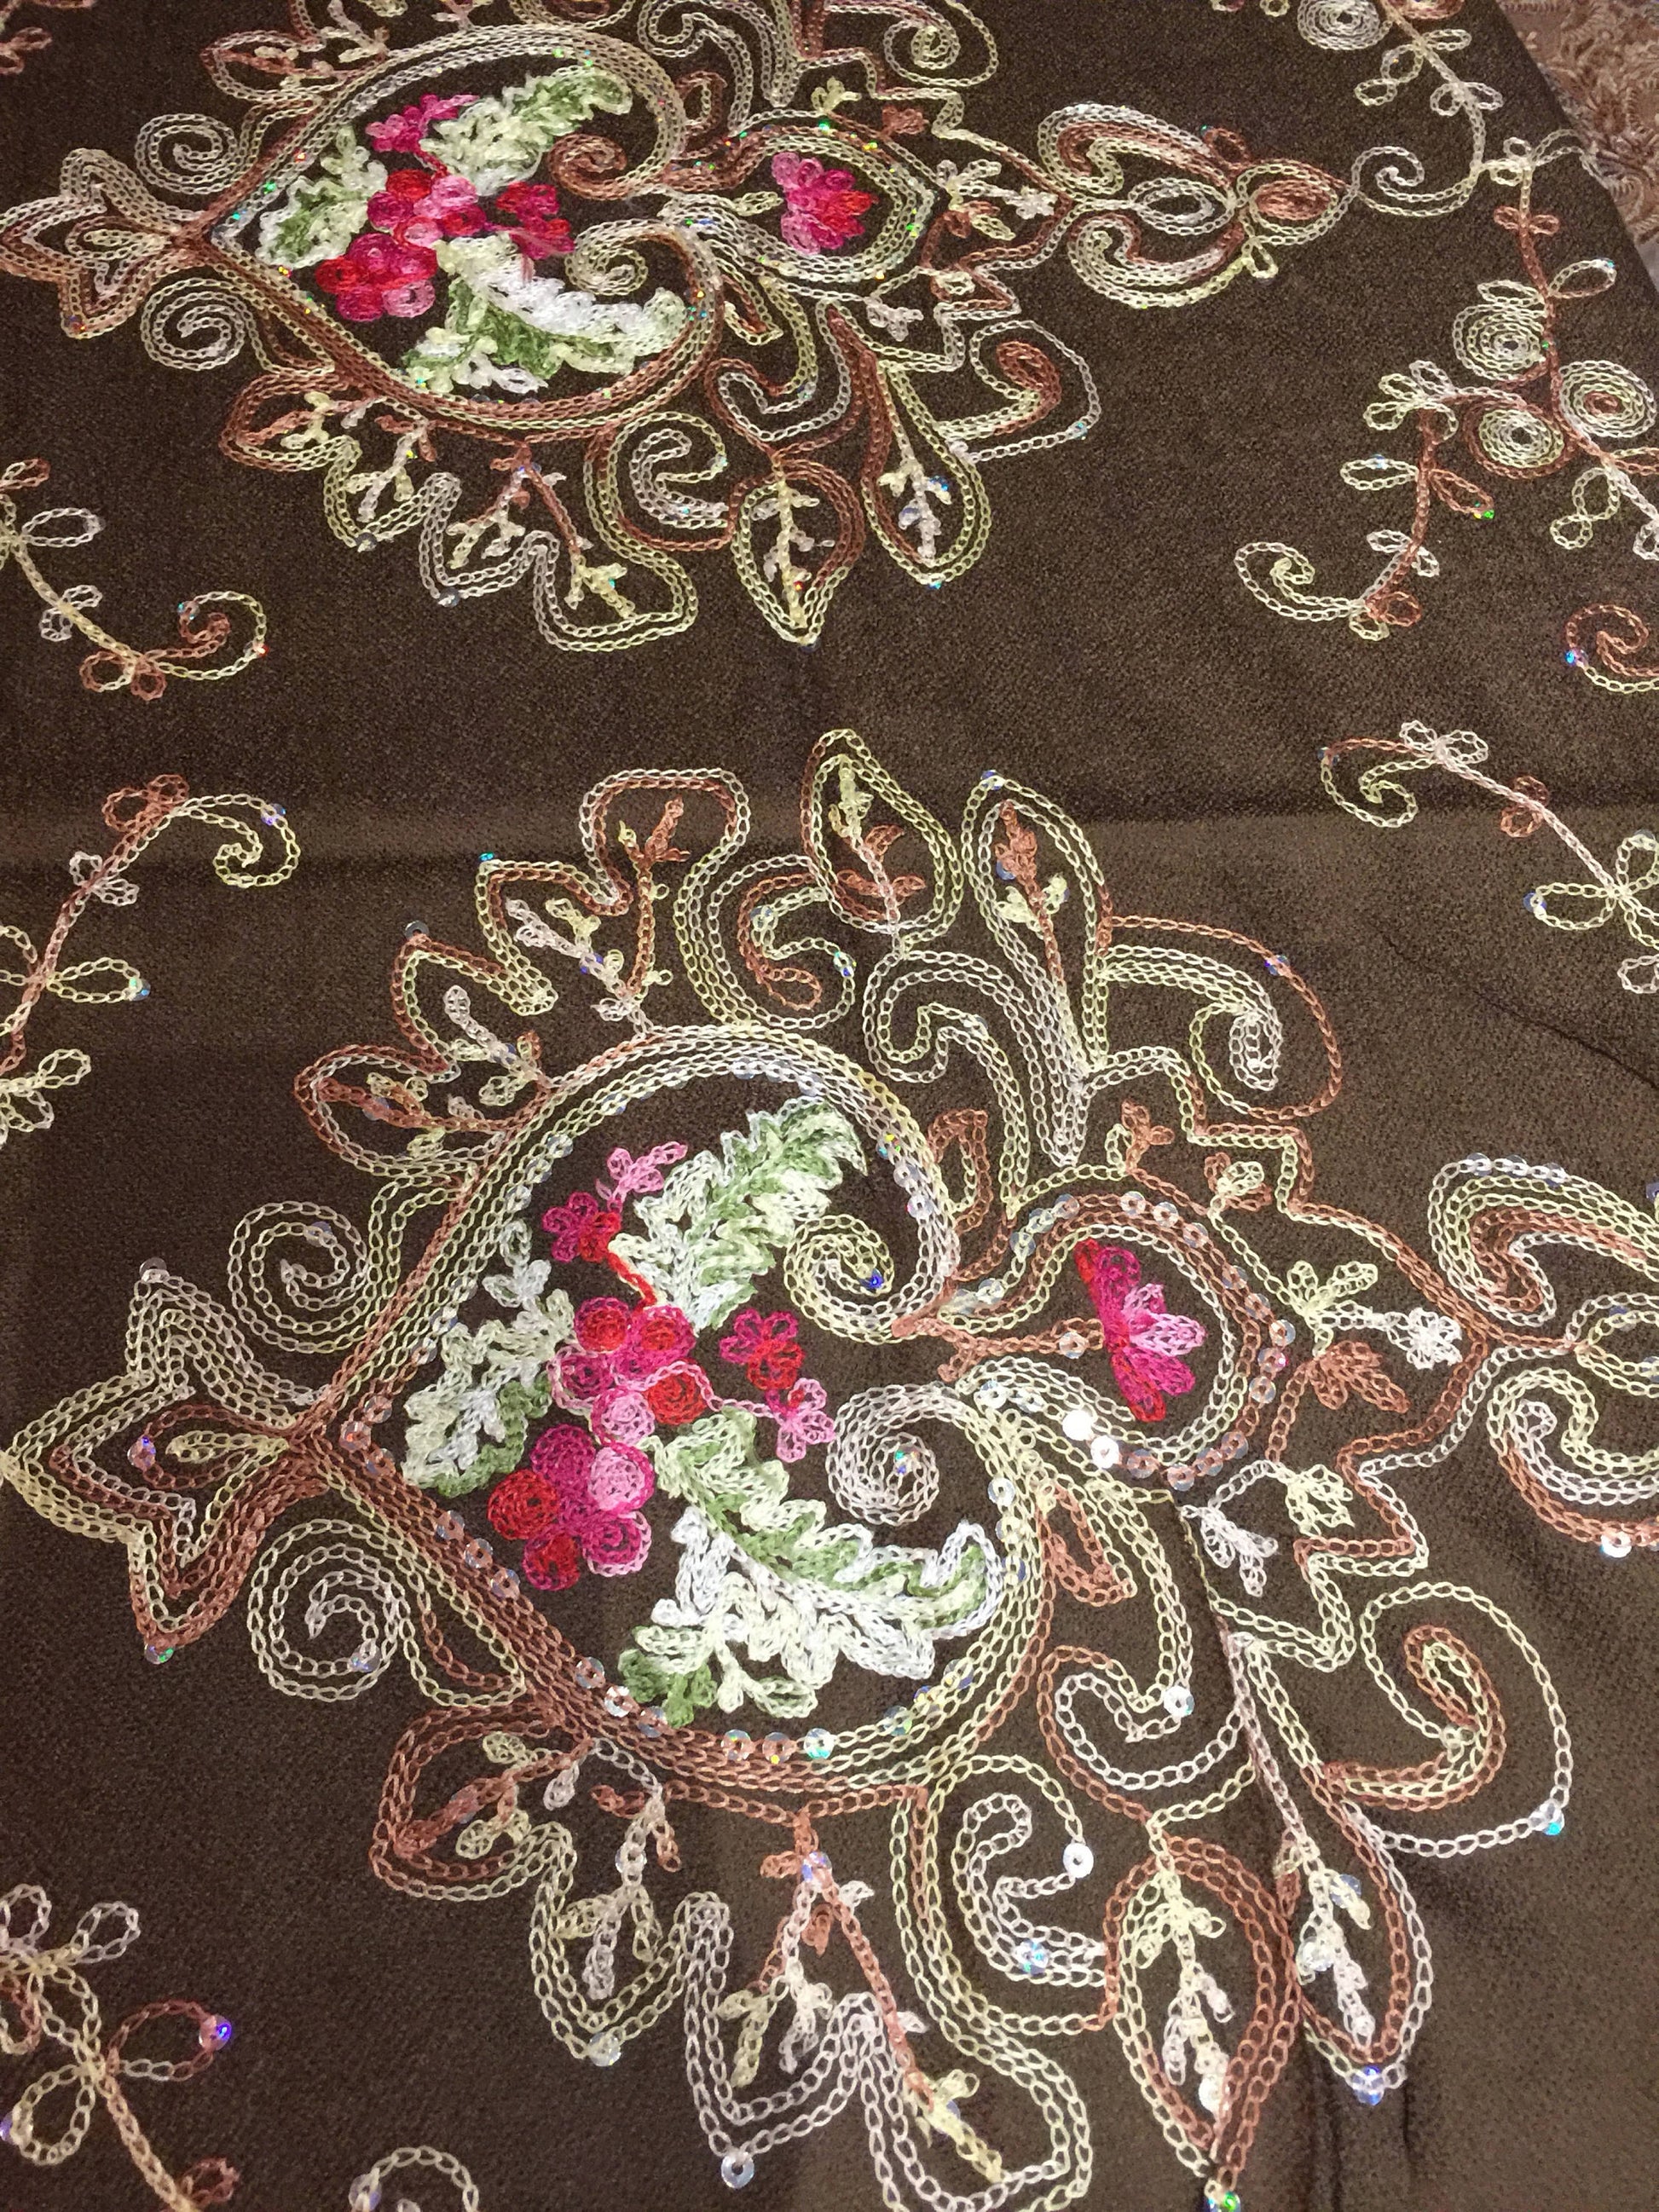 Vintage Styled Mixed Colored Flower Embroidered Pashmina Shawl